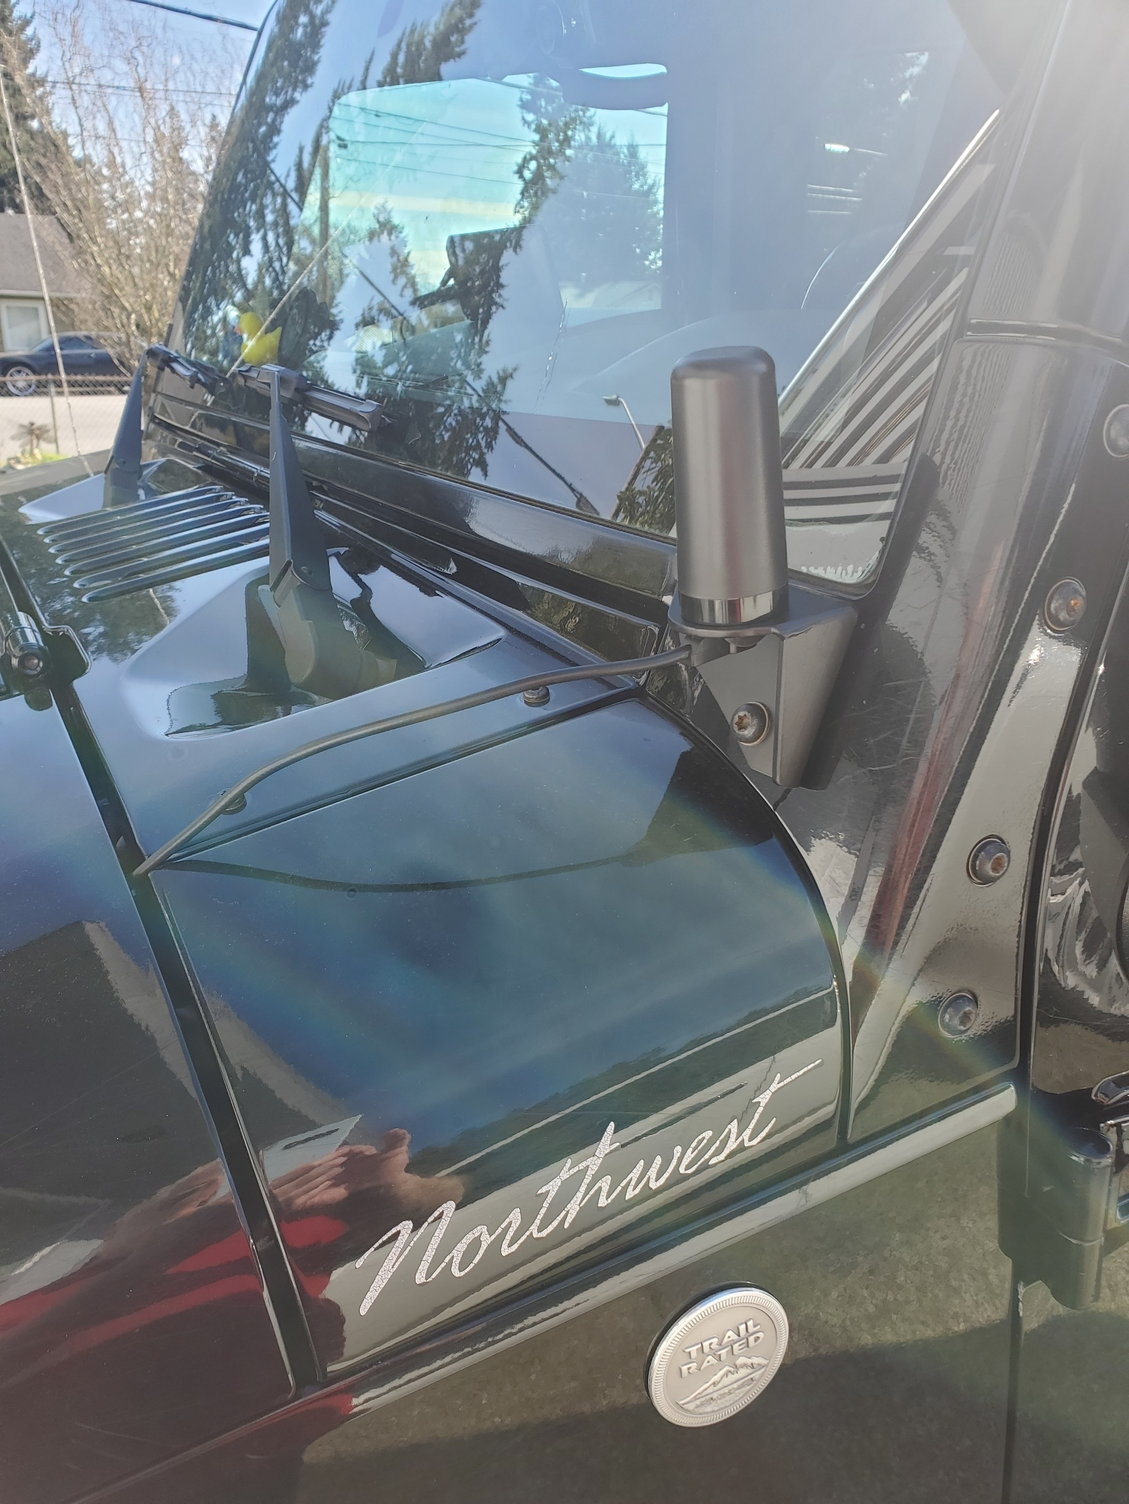 GMRS Antenna mount  - The top destination for Jeep JK and JL  Wrangler news, rumors, and discussion